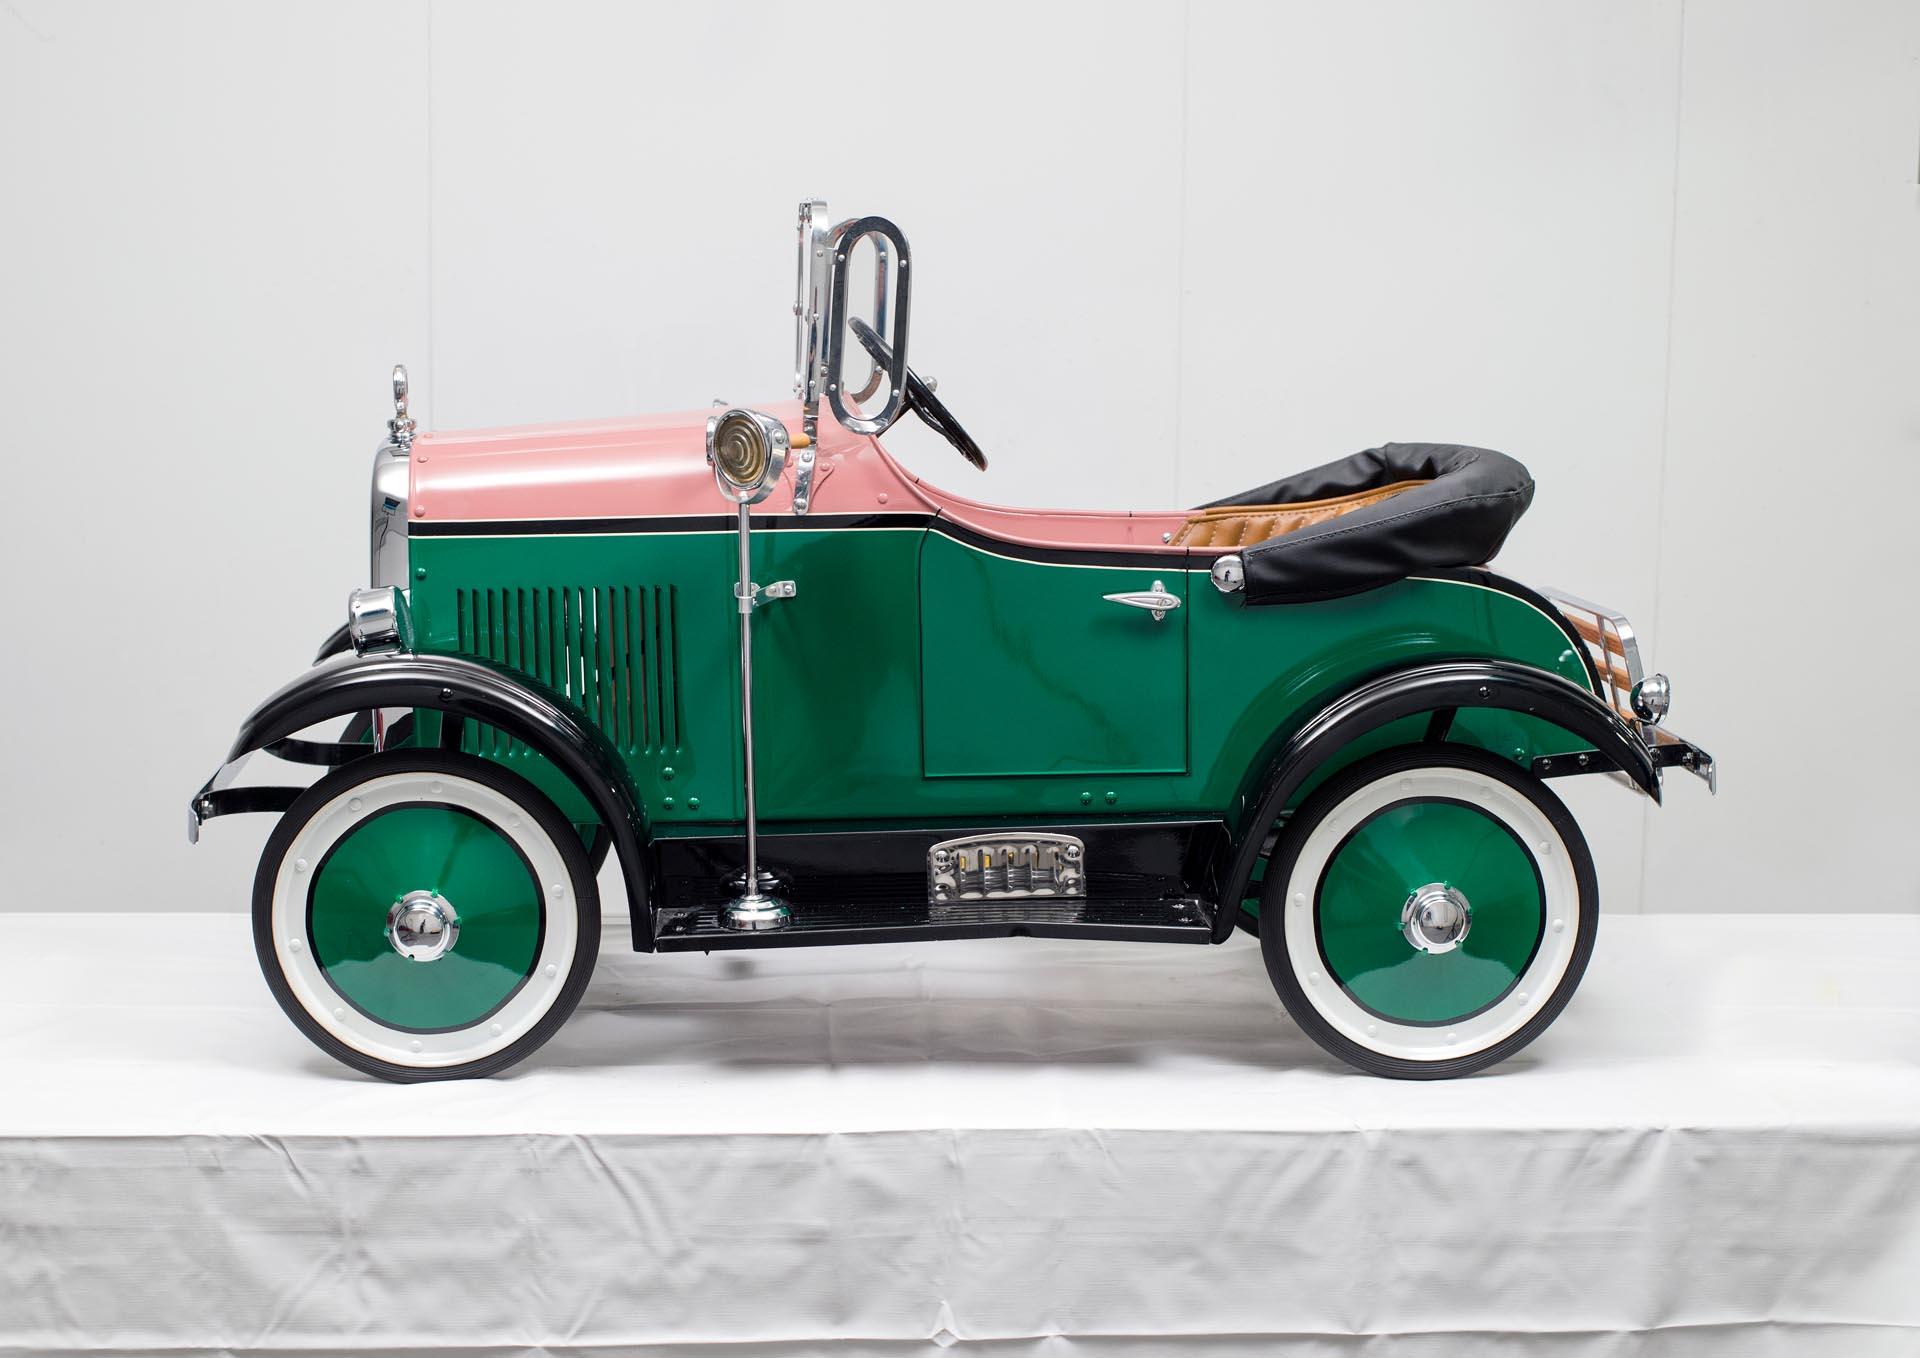 1928 Steelcraft Lincoln Pedal Car